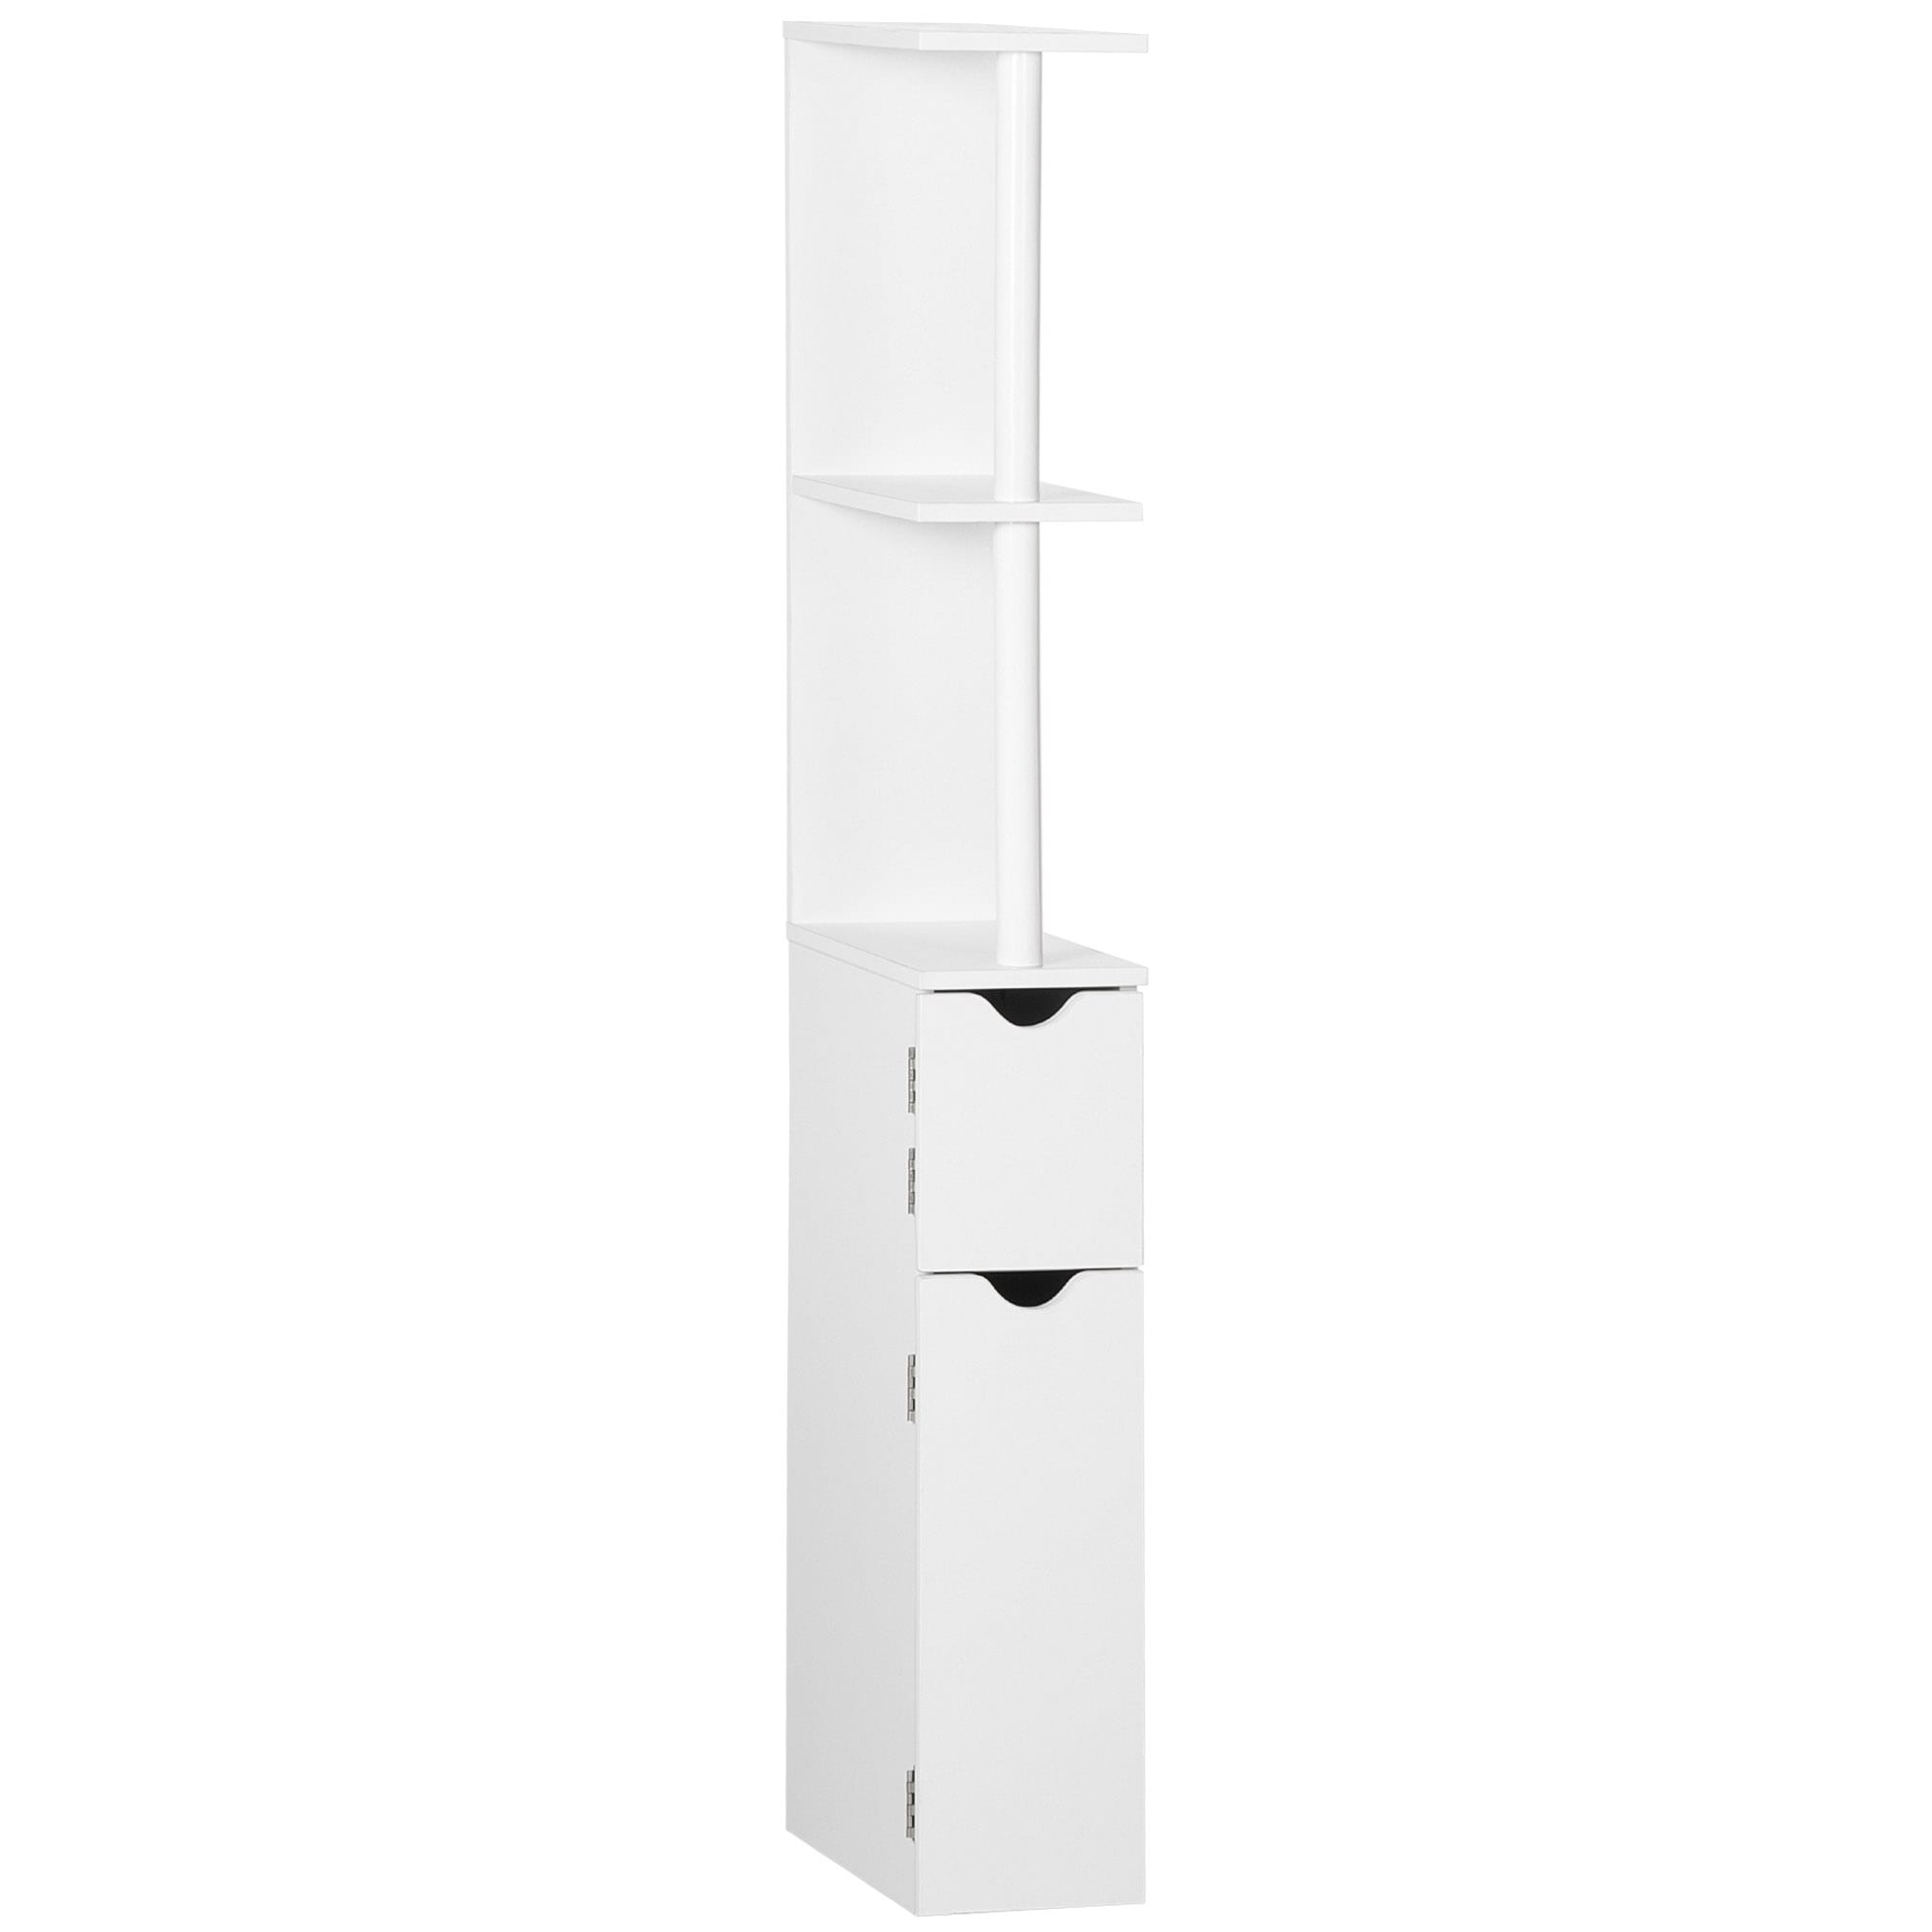 https://ak1.ostkcdn.com/images/products/is/images/direct/52e8990e61417ef33417925fae05e3ee92b0401e/kleankin-Tall-Bathroom-Storage-Cabinet-with-2-Open-Shelves-and-2-Door-Cabinets%2C-Freestanding-Linen-Tower.jpg